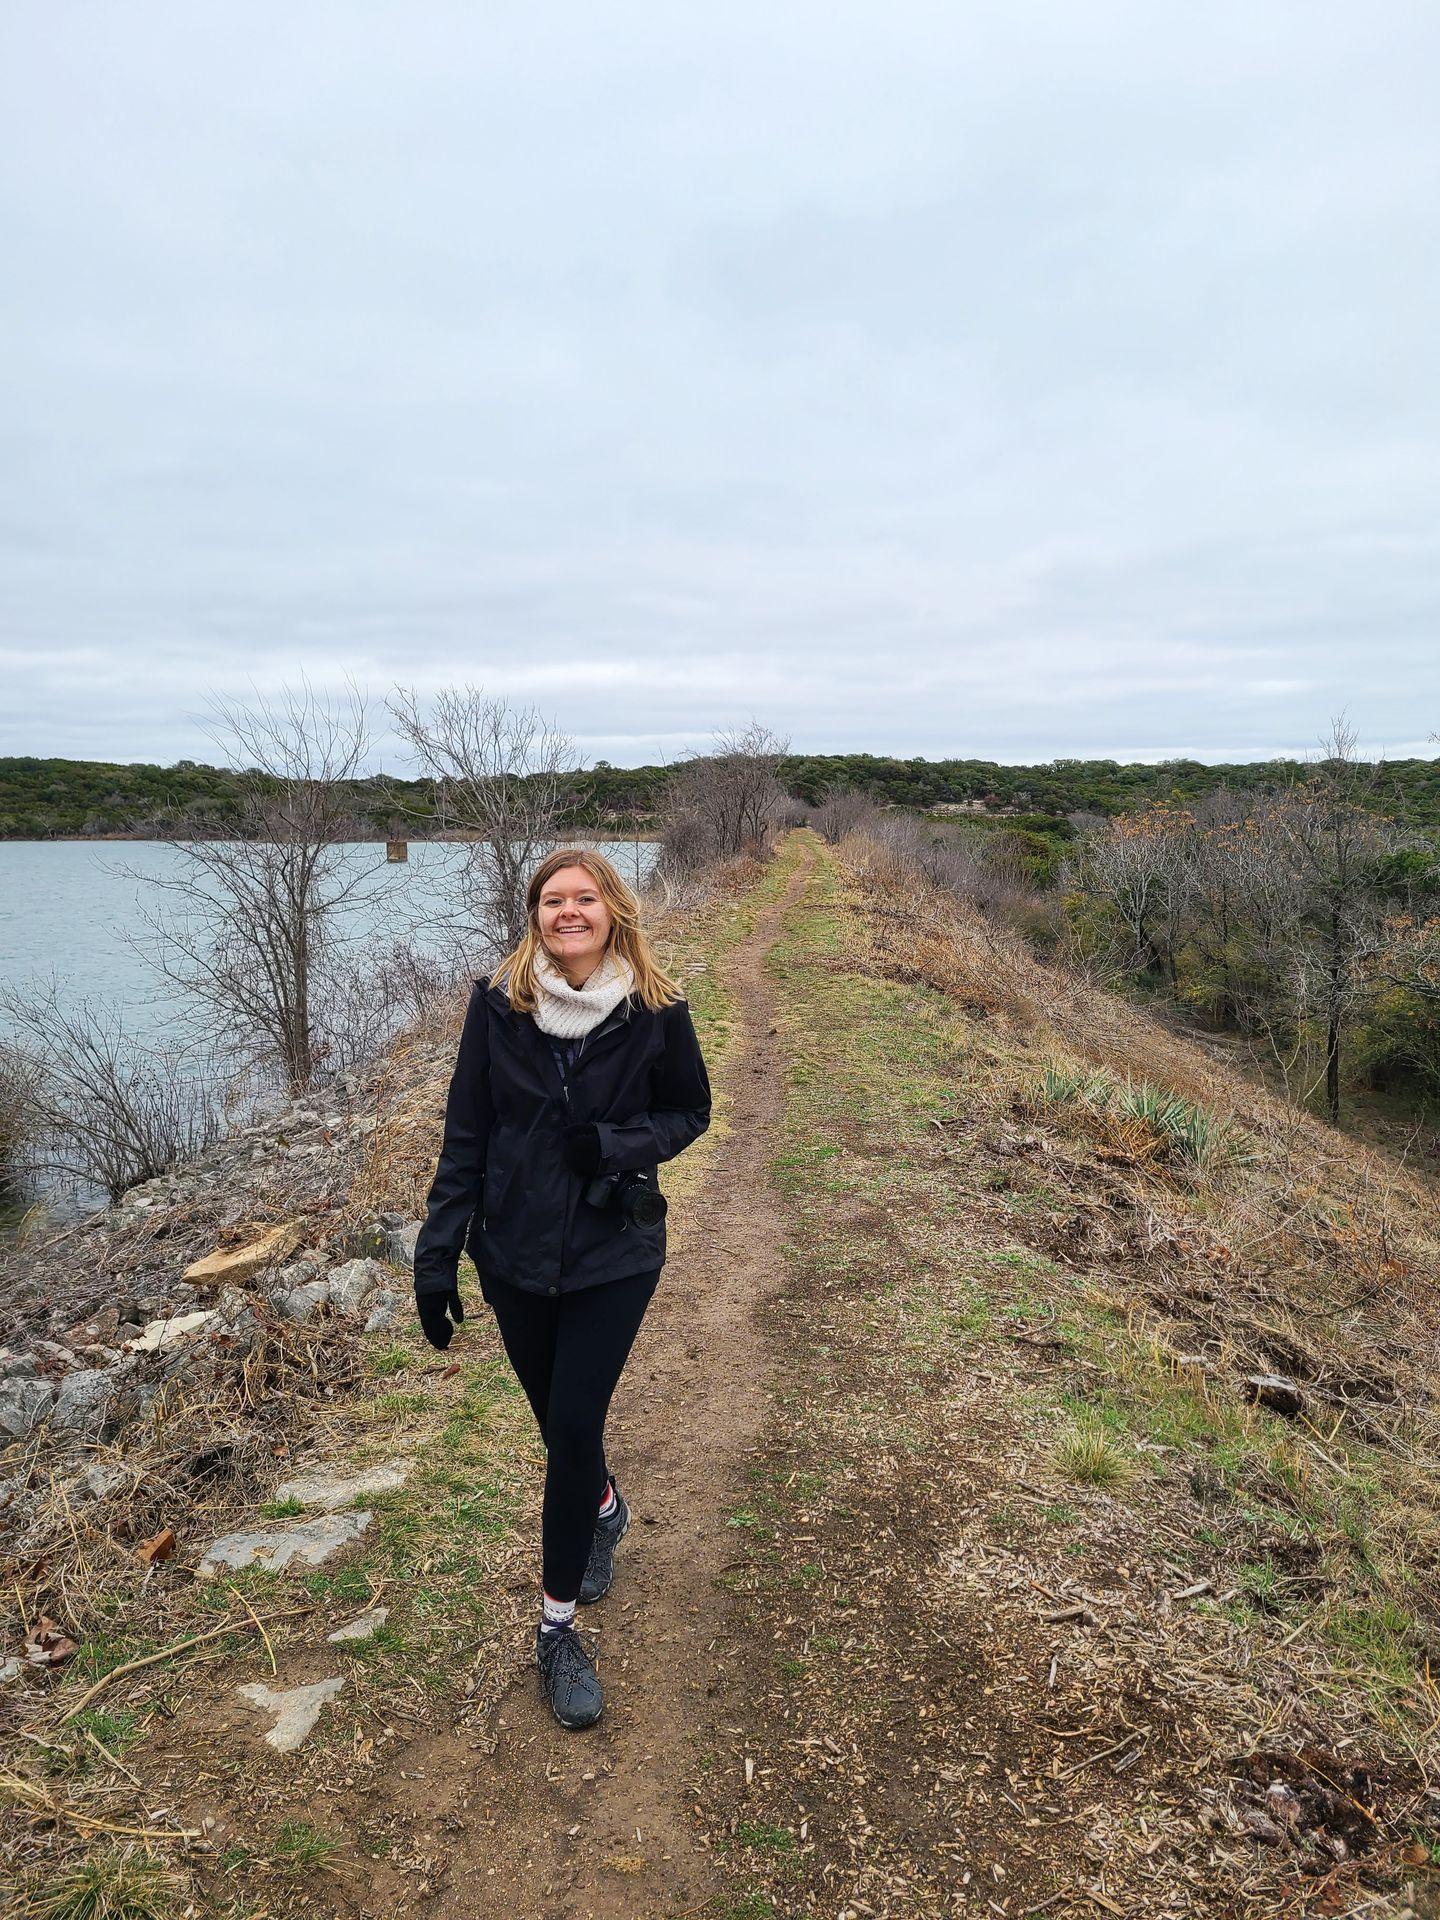 Lydia walking along a trail next to the lake in Cleburne State Park